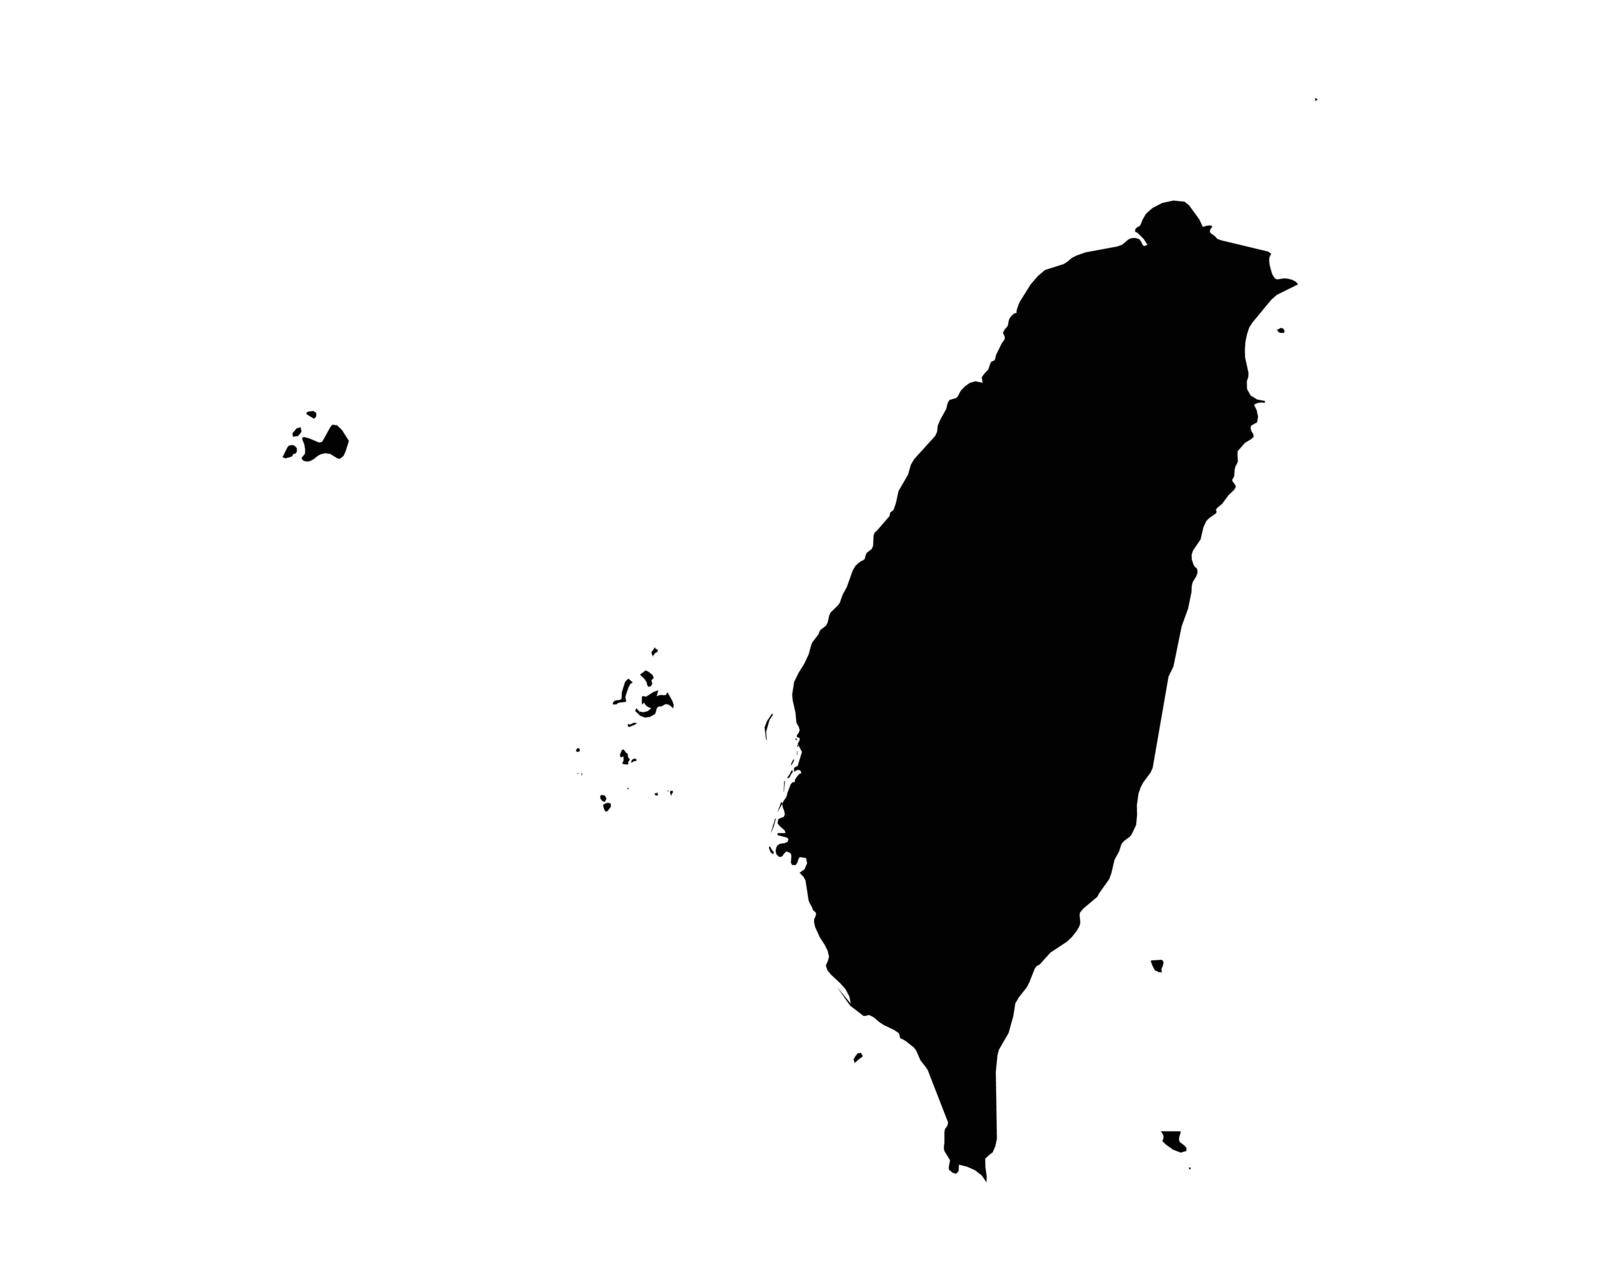 Taiwan Map. Taiwanese Country Map. Black and White Republic of China National Nation Geography Outline Border Boundary Territory Shape Vector Illustration EPS Clipart